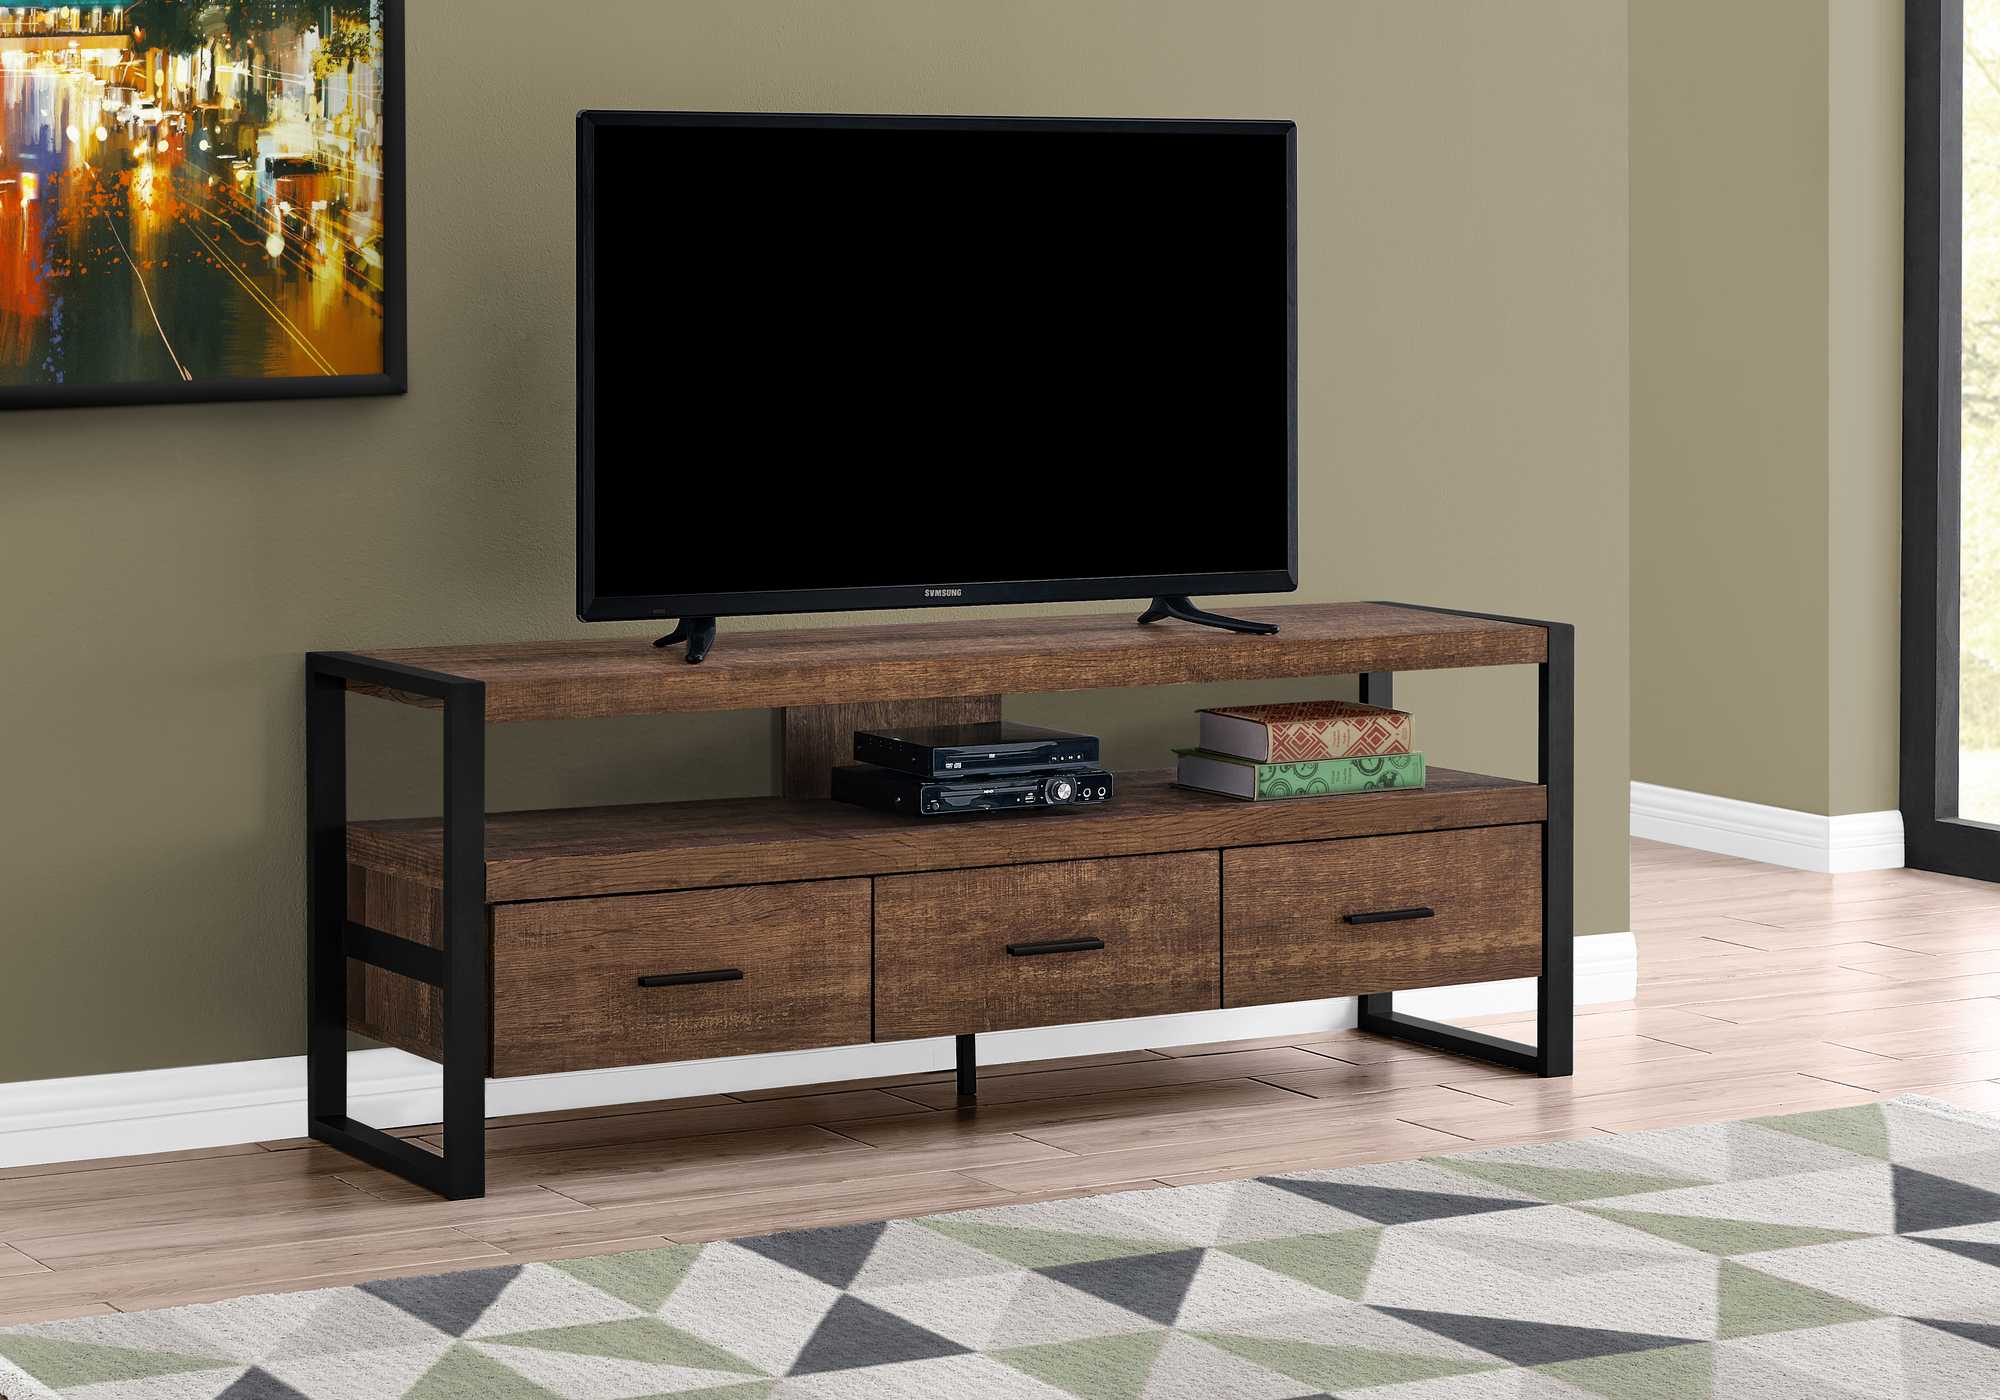 21.75" Particle Board Hollow Core & Black Metal Tv Stand With 3 Drawers